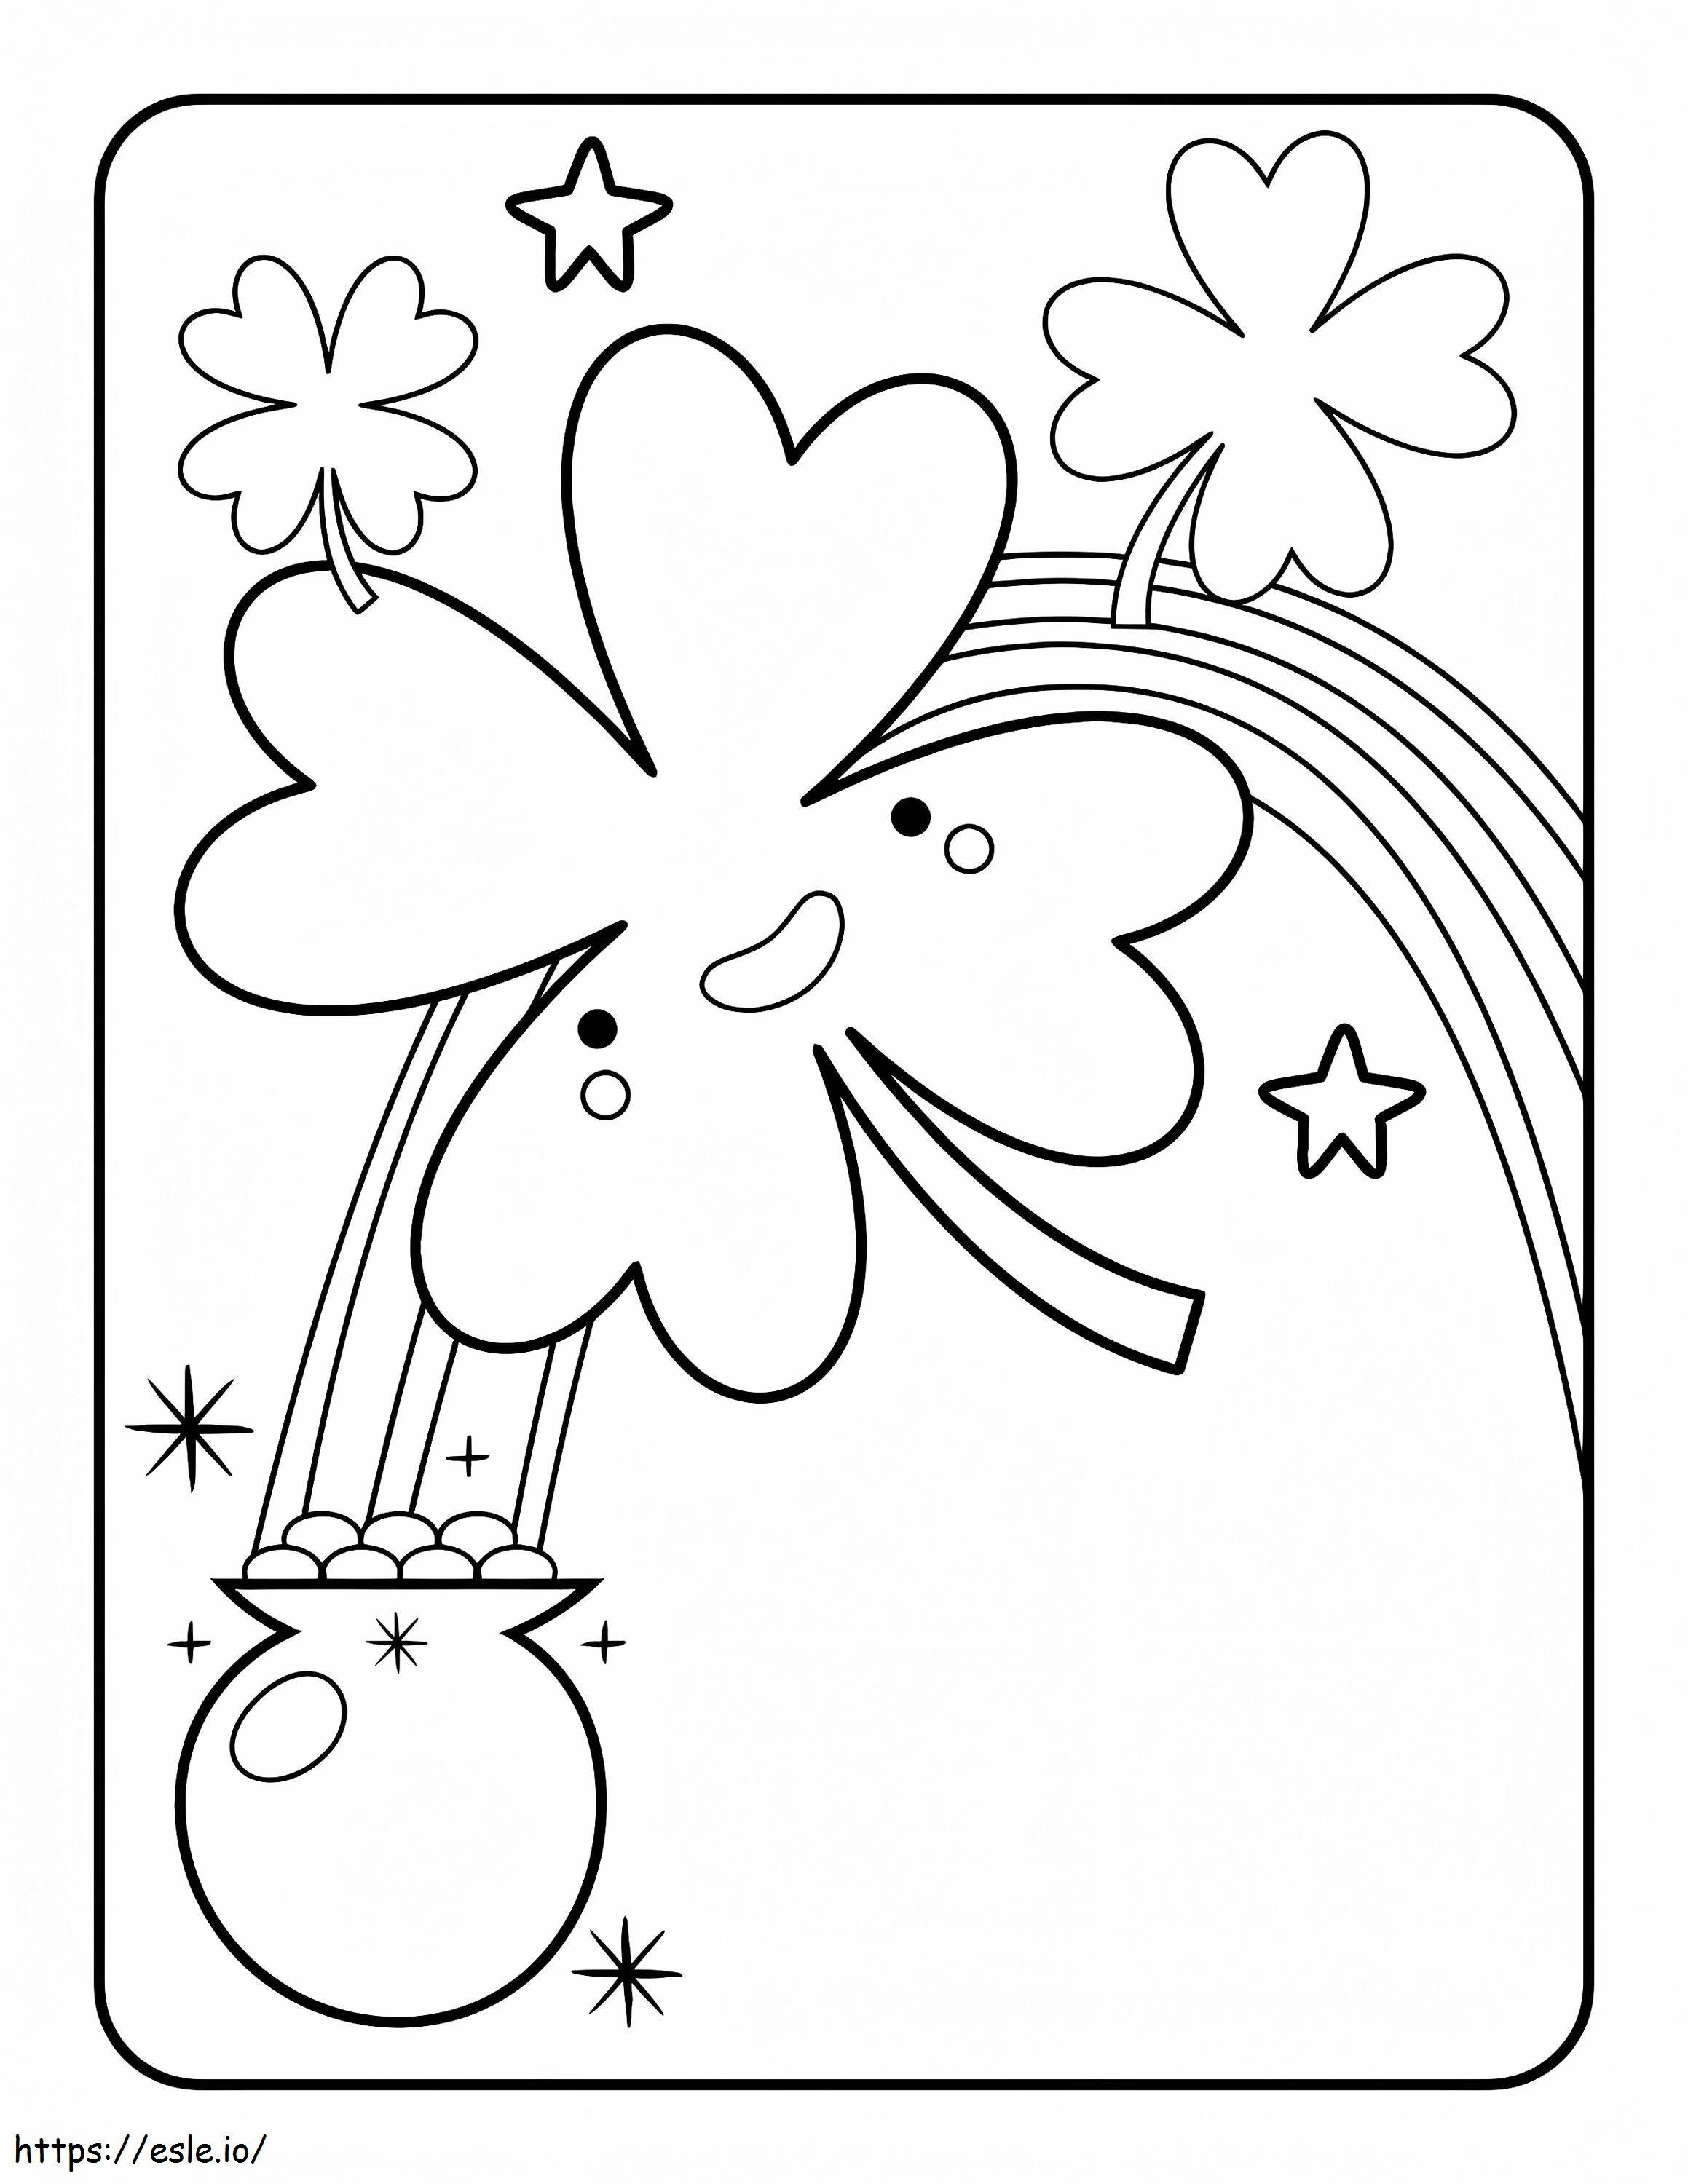 Funny Clover 1 coloring page